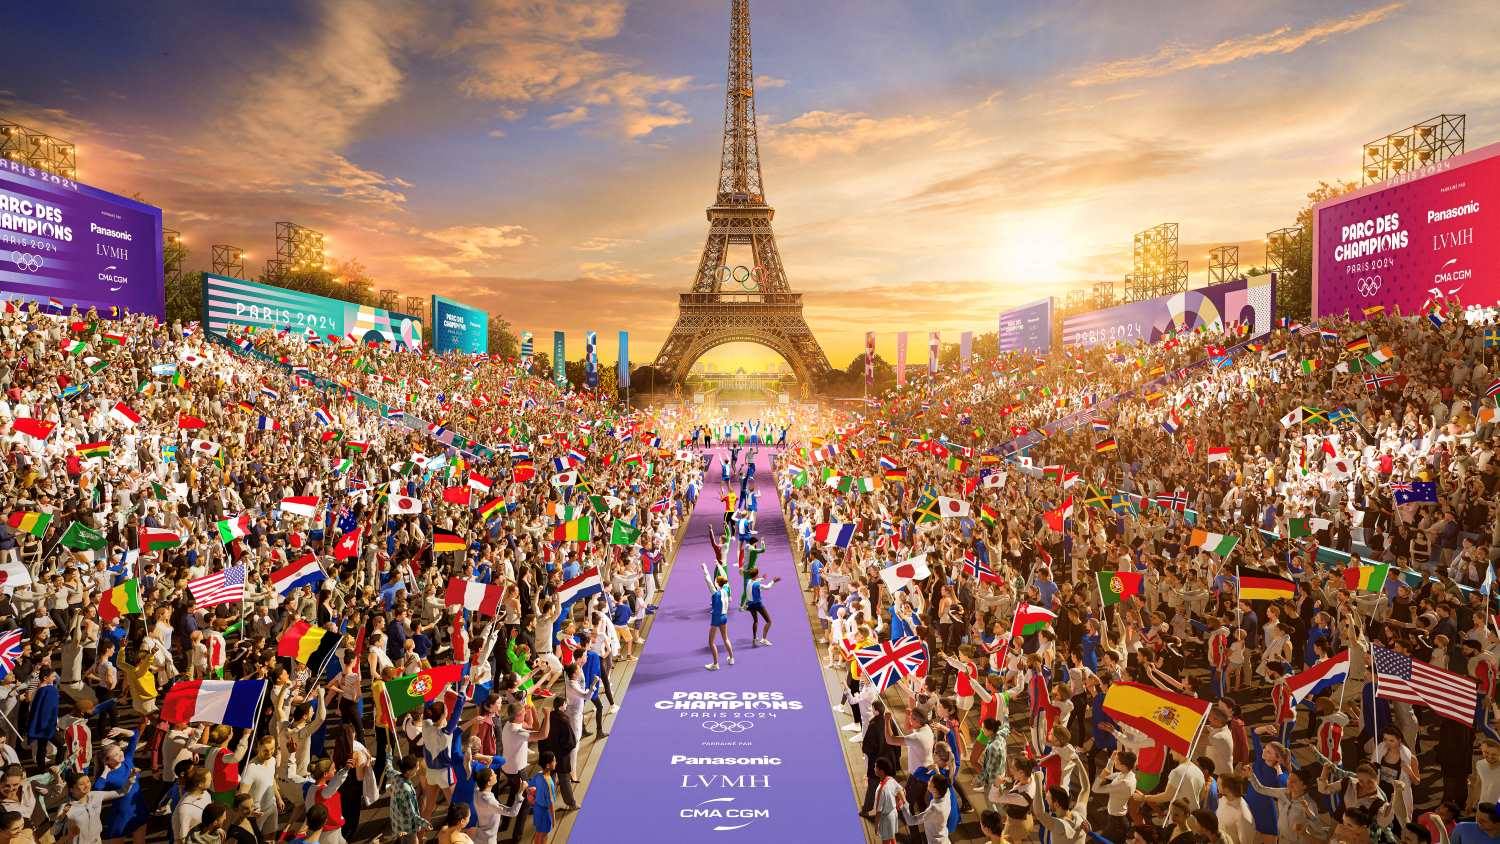 Paris during Olympics 2024-champ de mars-the knowledge nuggets